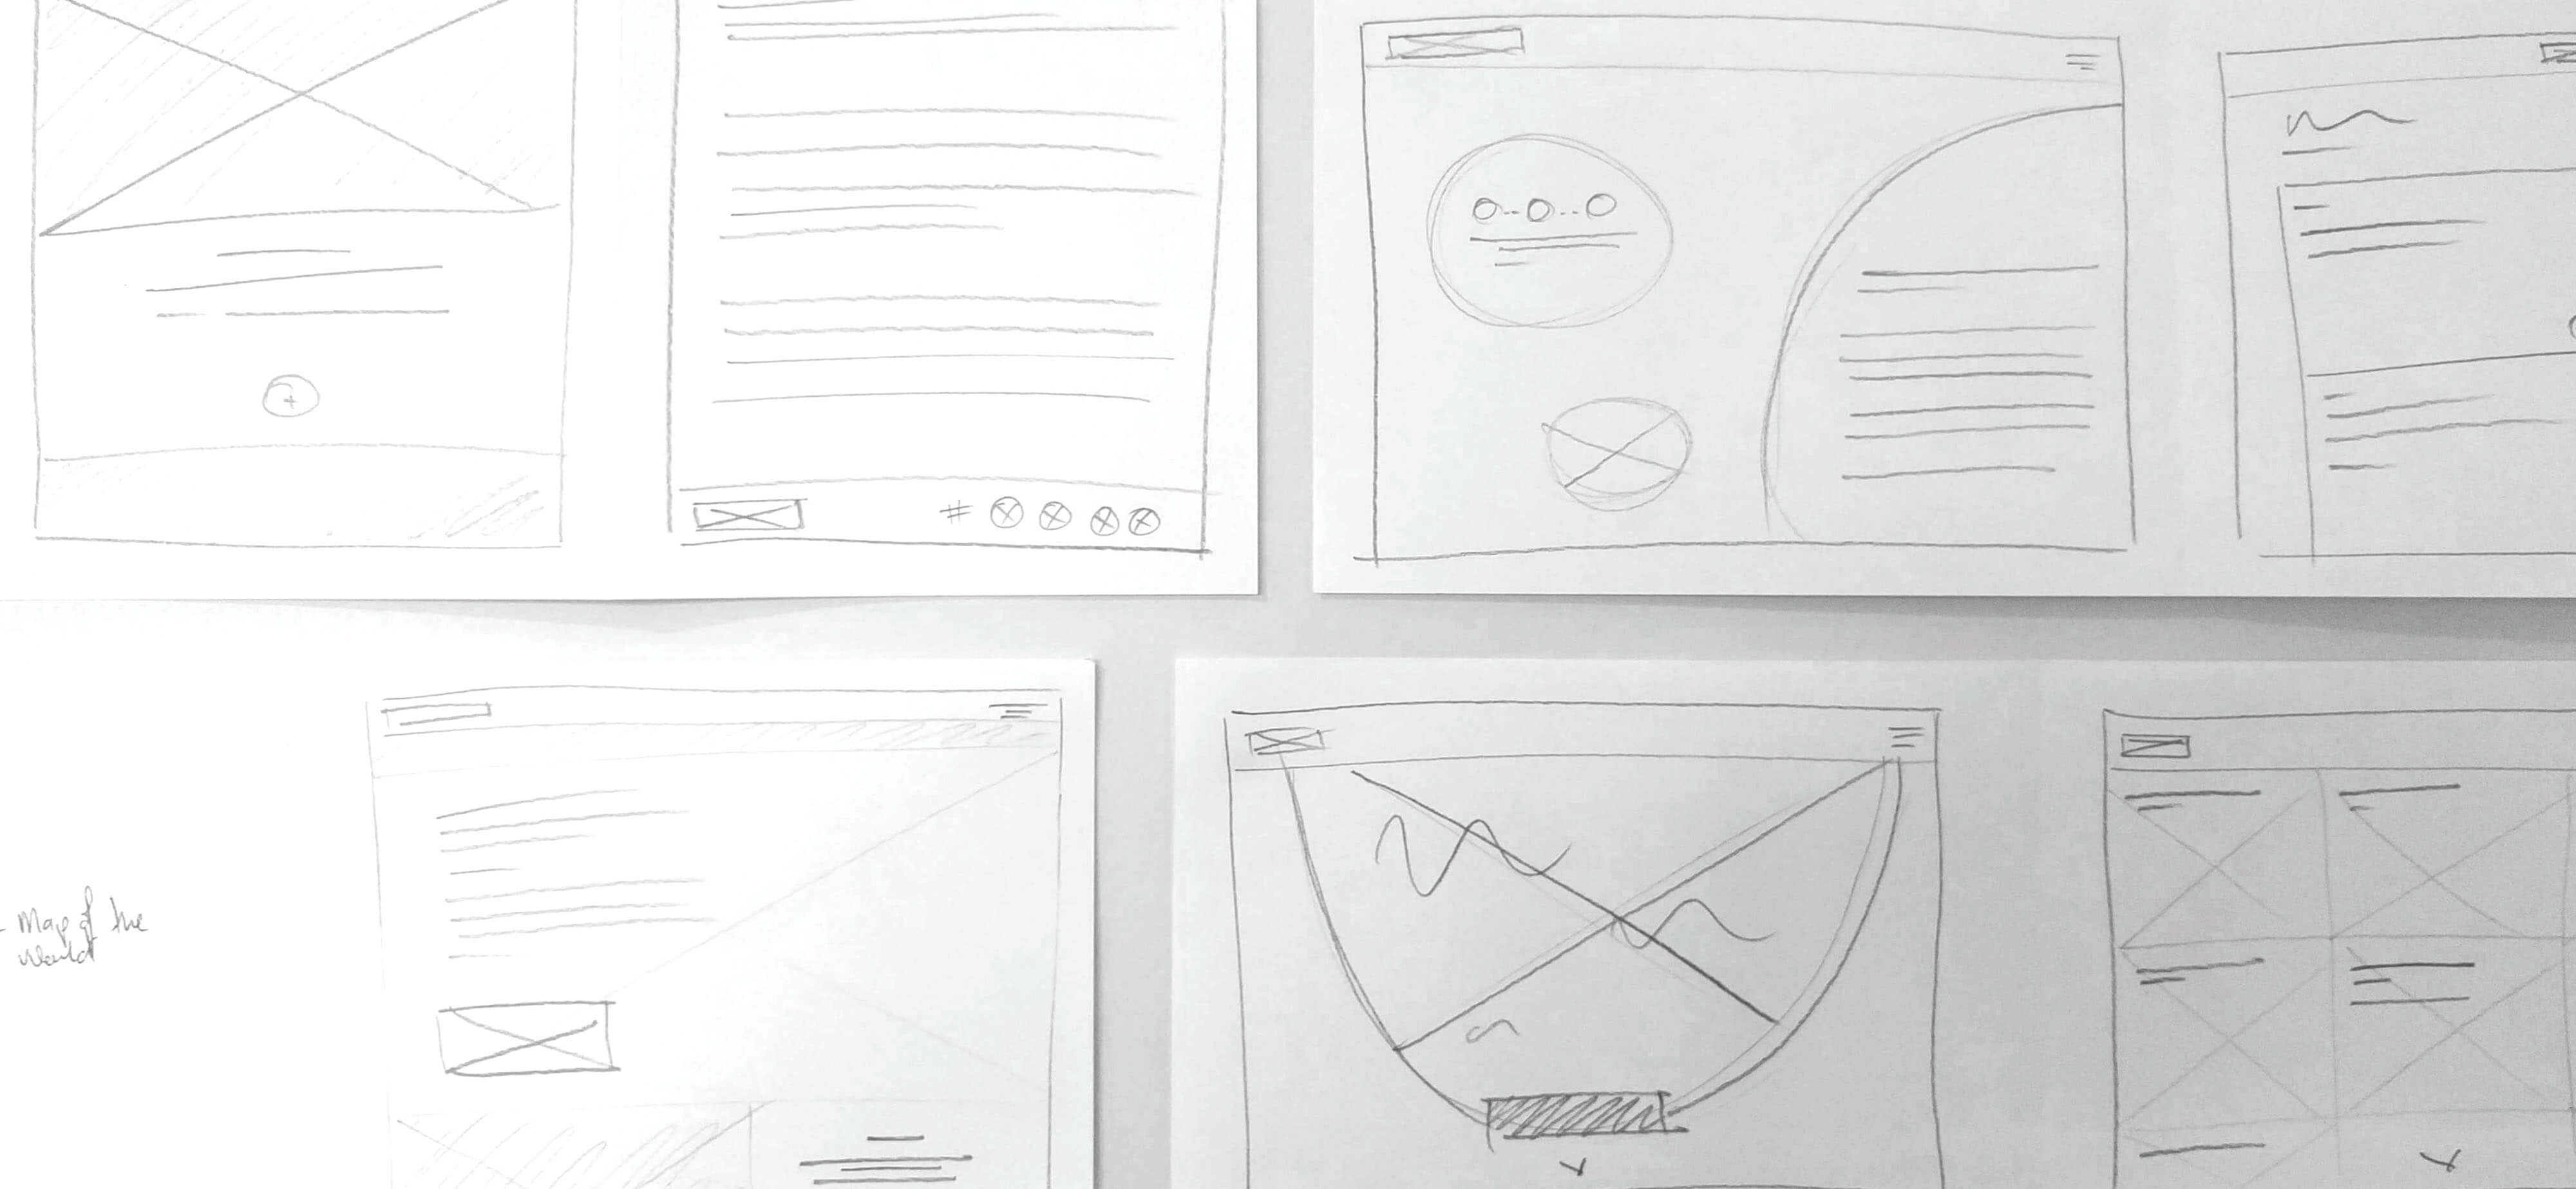 Early wireframe concepts.